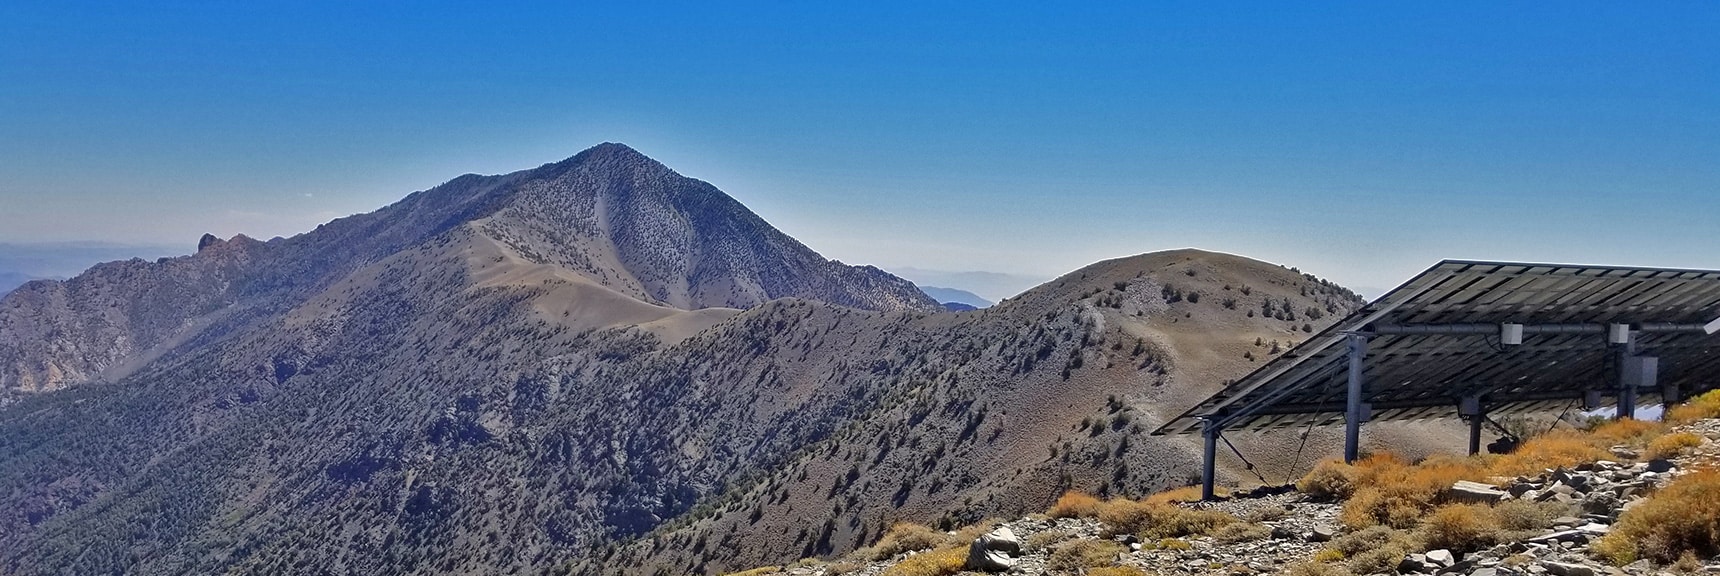 Bennett Peak and Telescope Peak Viewed from Rogers Peak Summit | Telescope Peak Summit from Wildrose Charcoal Kilns Parking Area, Panamint Mountains, Death Valley National Park, California